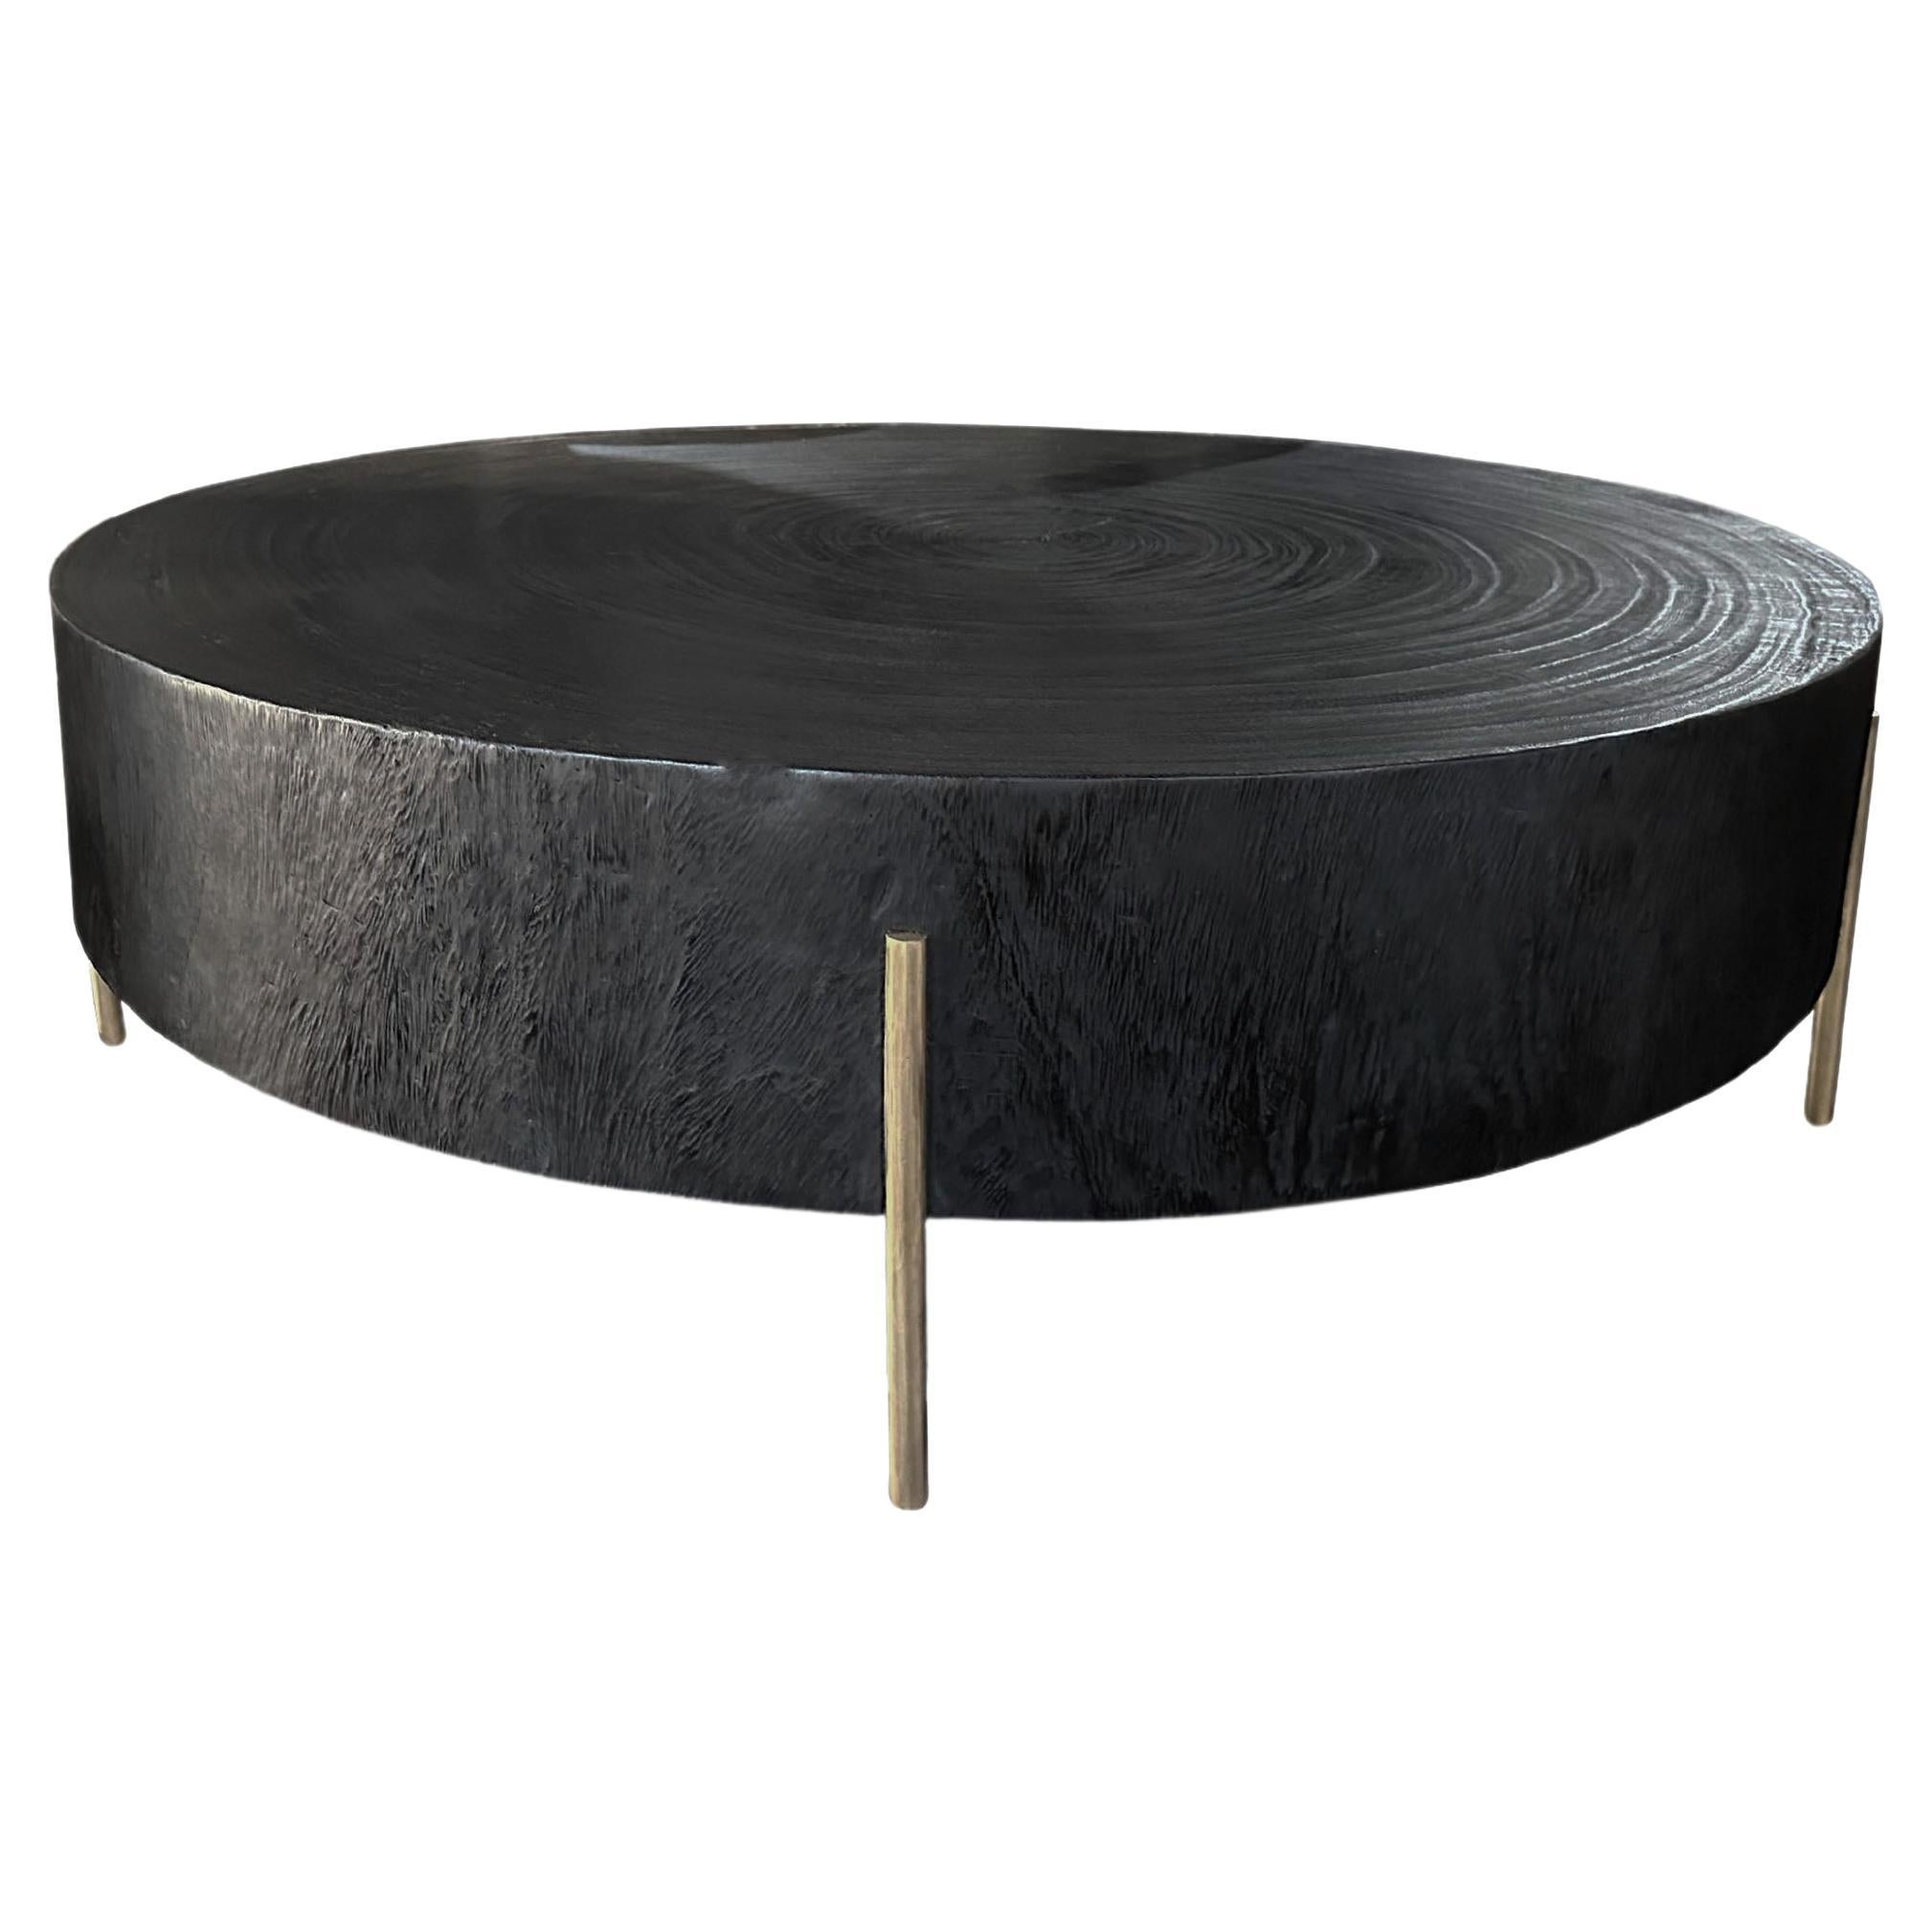 Modern Organic Side Table Crafted from Mango Wood with Brass Legs, Burnt Finish